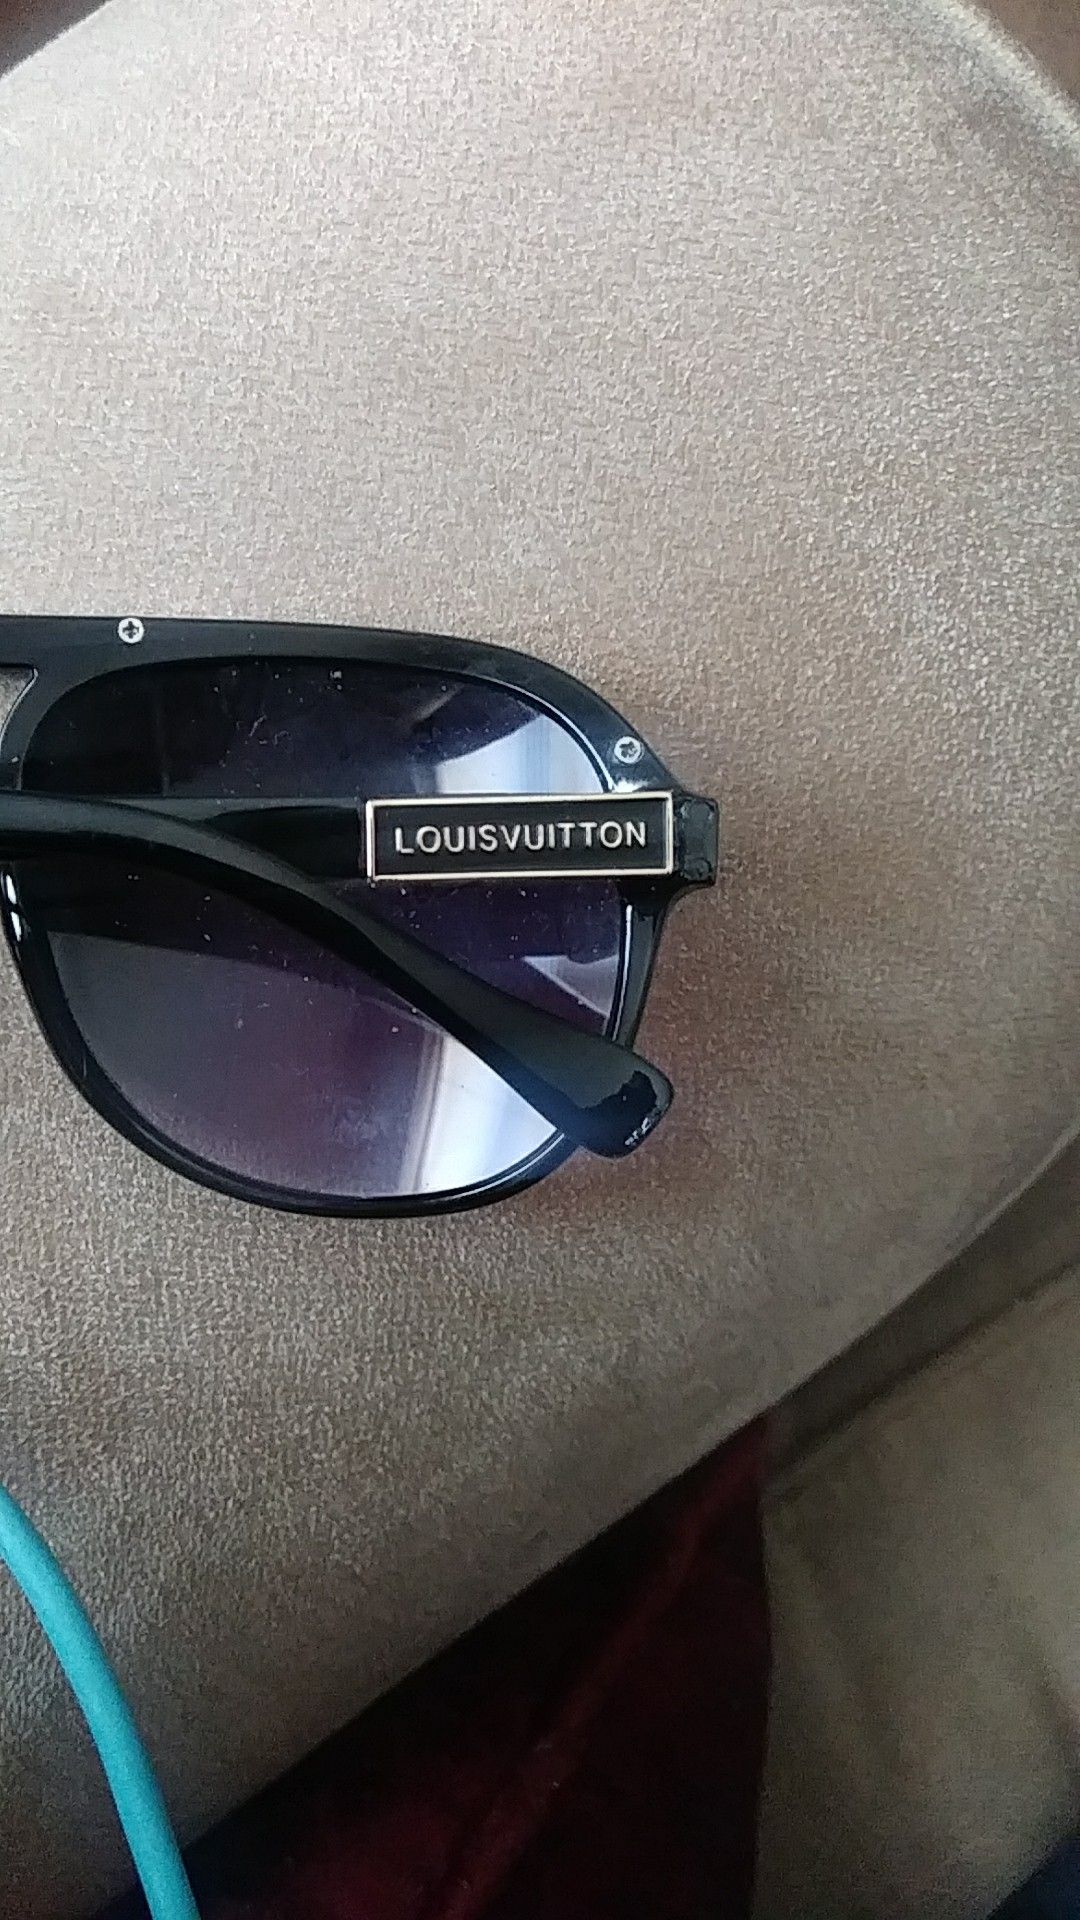 Louis vton shades. They real because they have the code